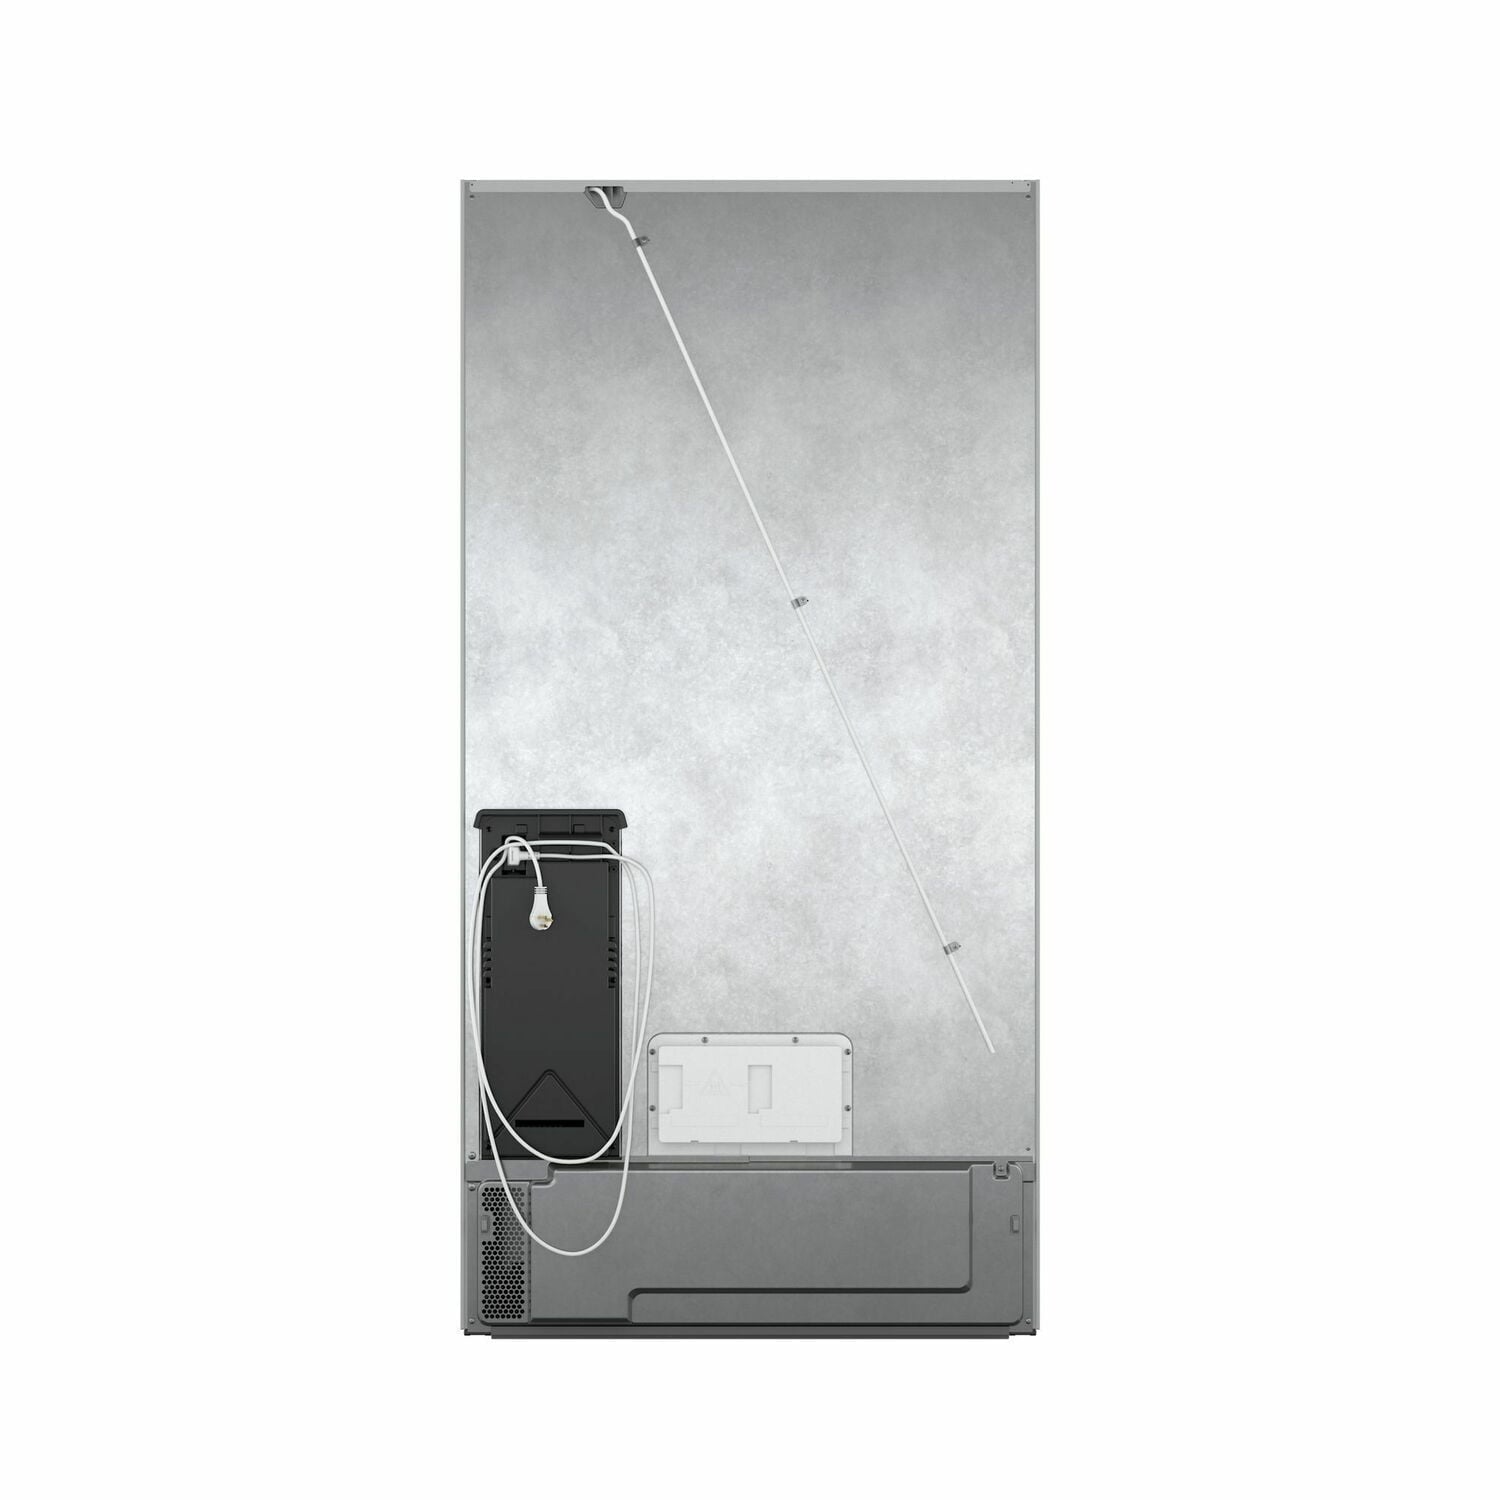 Bosch B36CT81SNS 800 Series French Door Bottom Mount Refrigerator 36'' Easy Clean Stainless Steel B36Ct81Sns